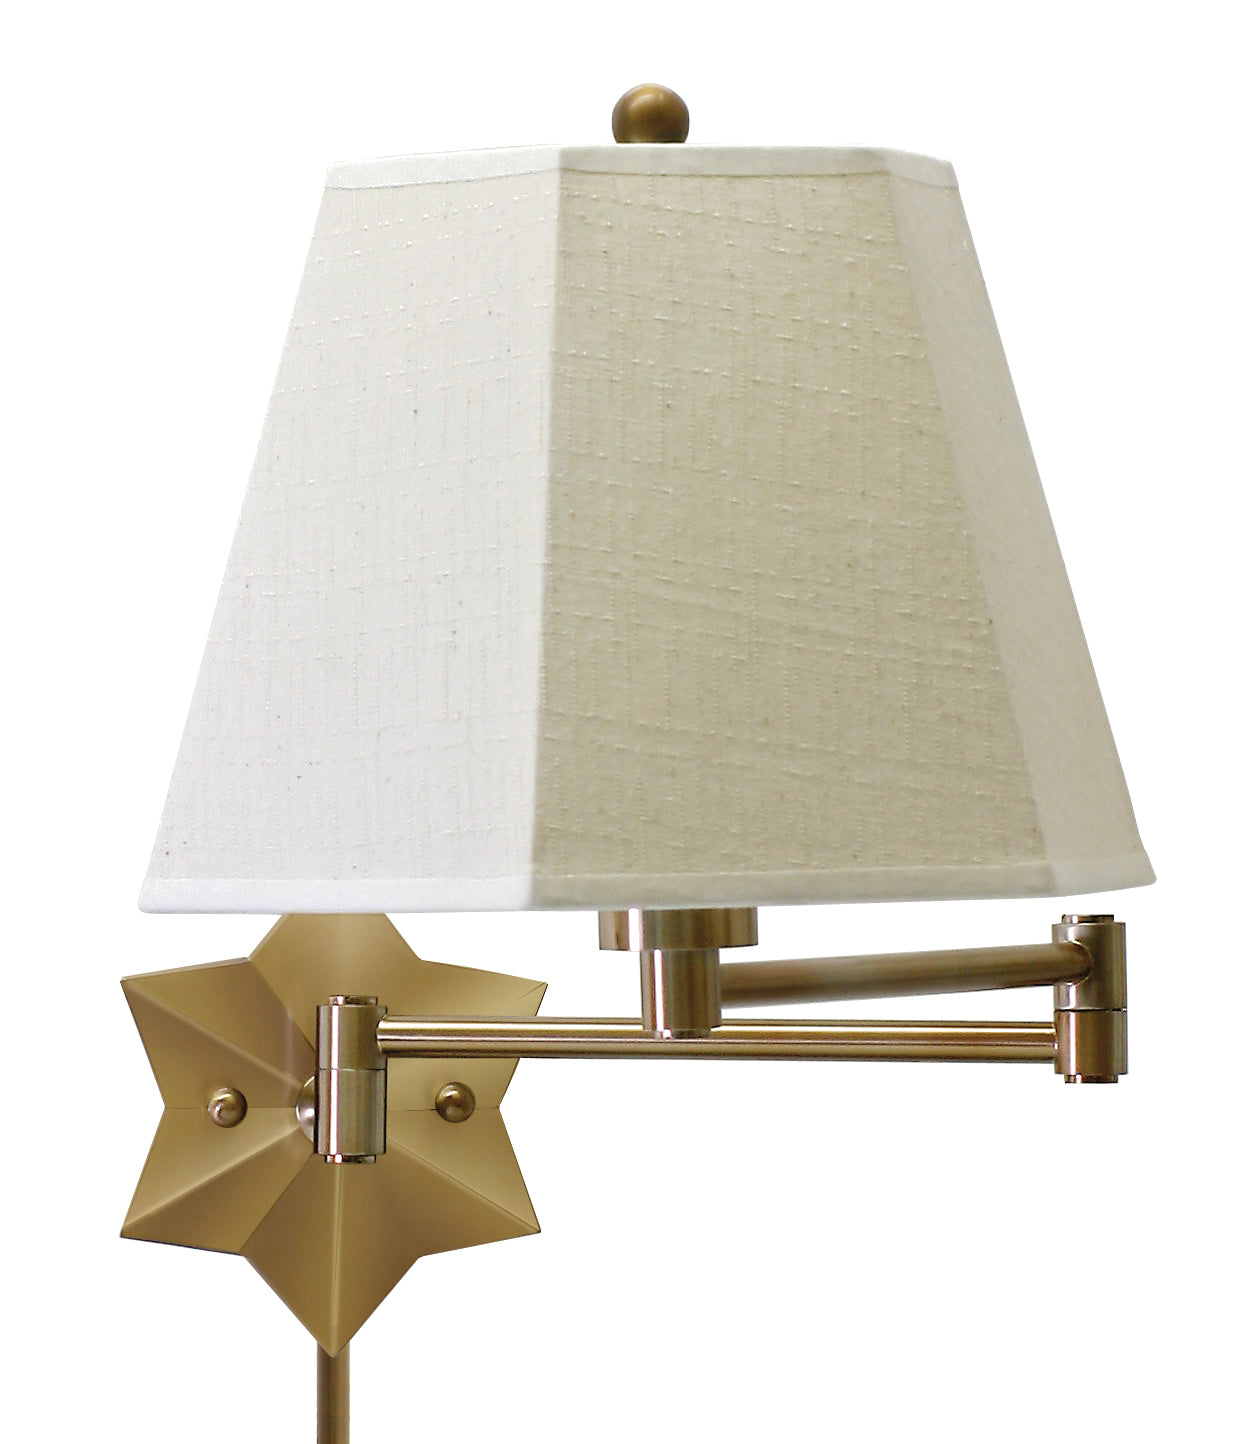 House of Troy Wall Swing Arm Lamp Antique Brass WS751-AB